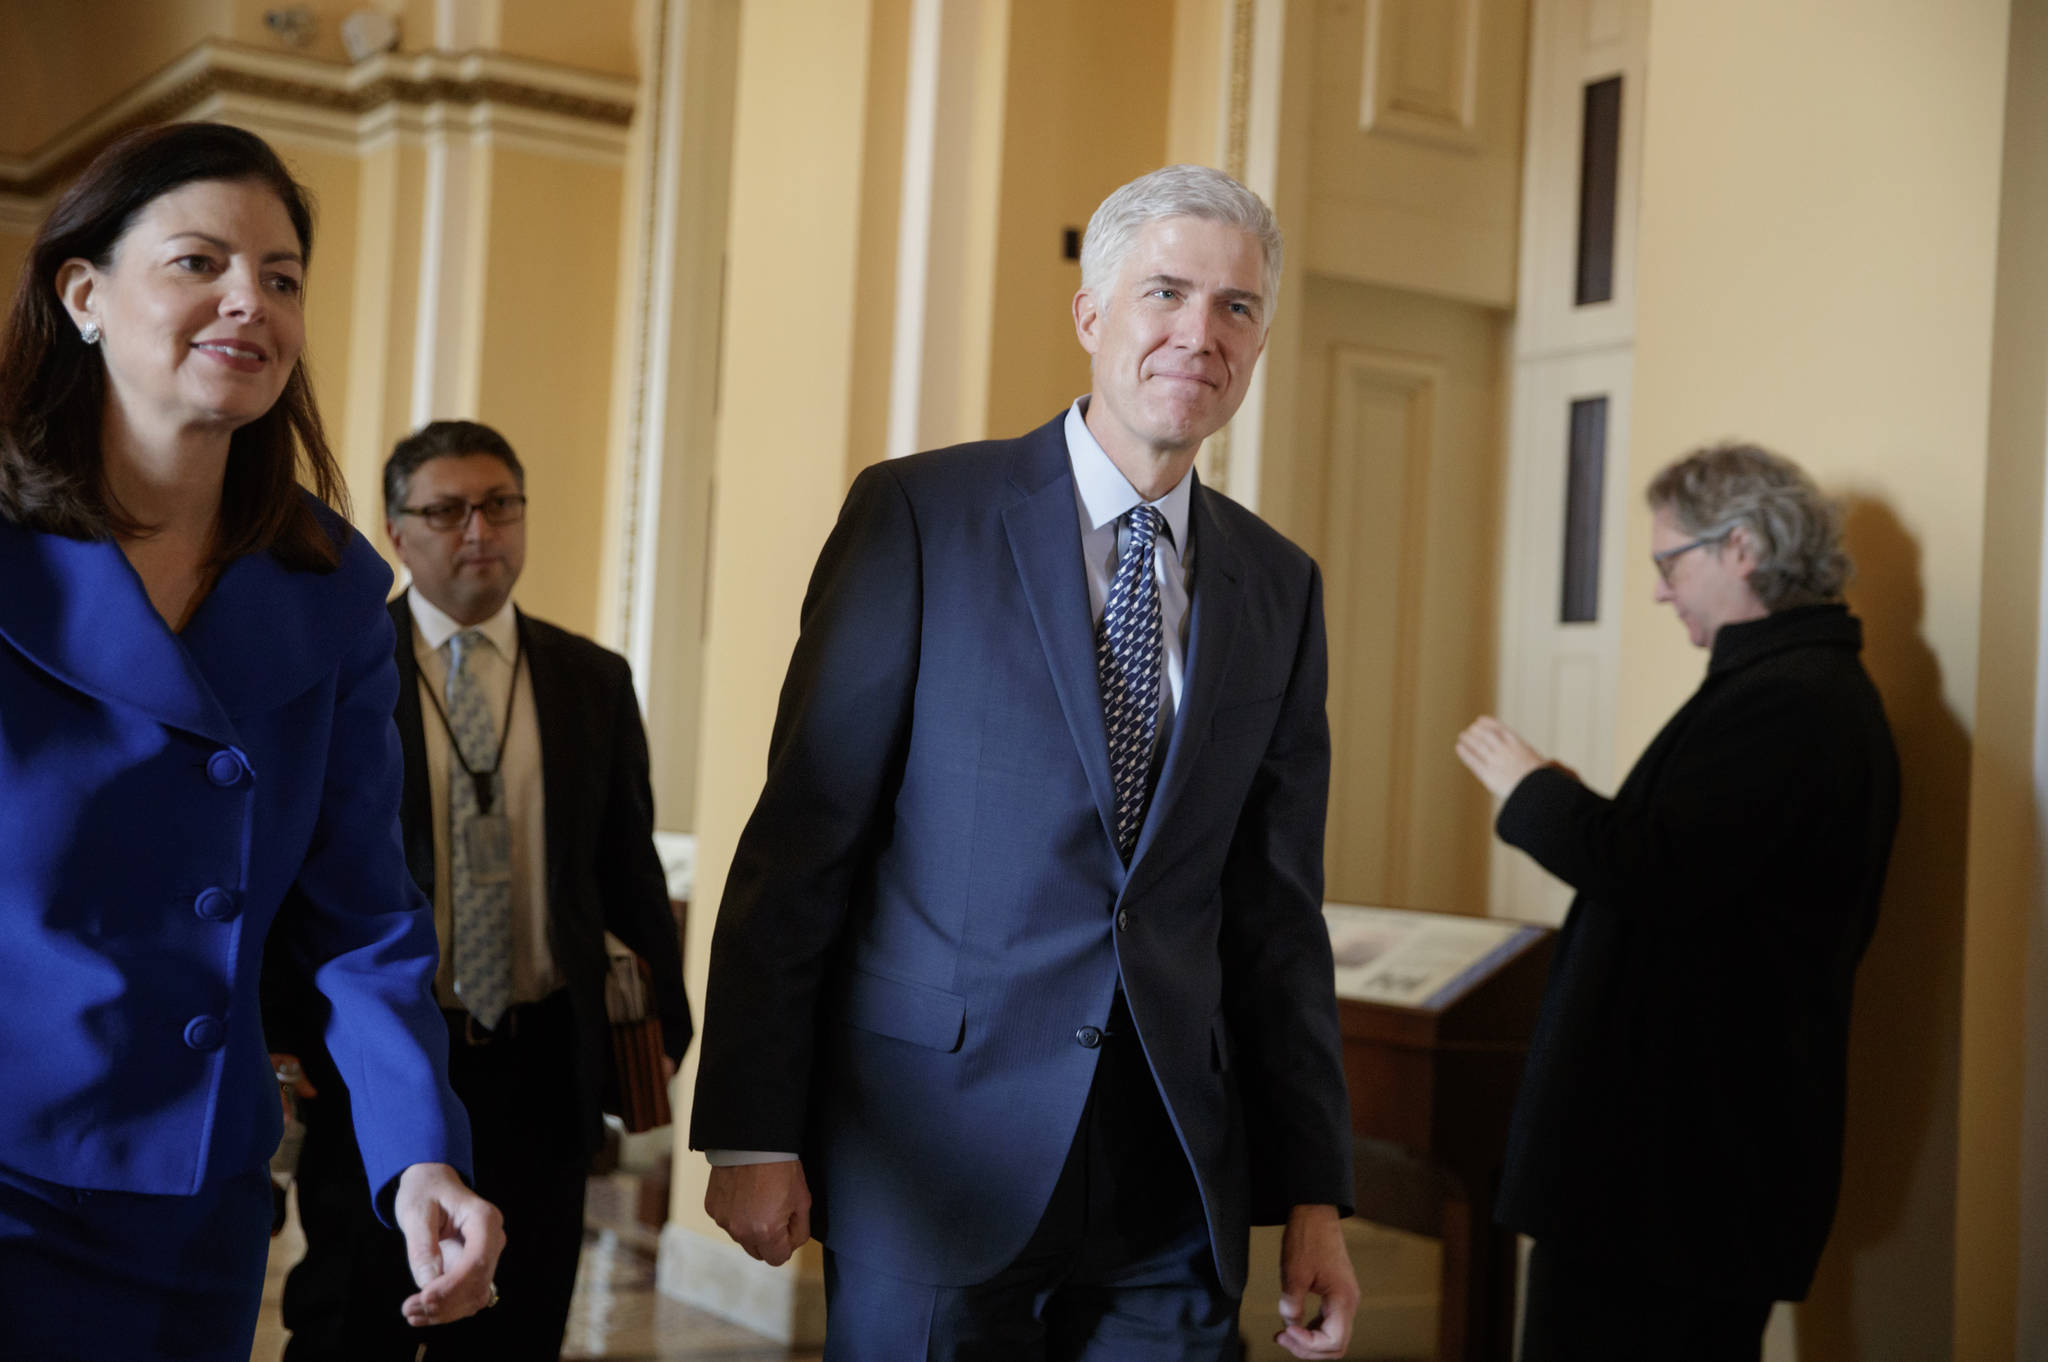 In this Feb. 2 photo, Supreme Court Justice nominee Neil Gorsuch, right, escorted by former New Hampshire Sen. Kelly Ayotte walks on Capitol Hill in Washington. (J. Scott Applewhite | The Associated Press)